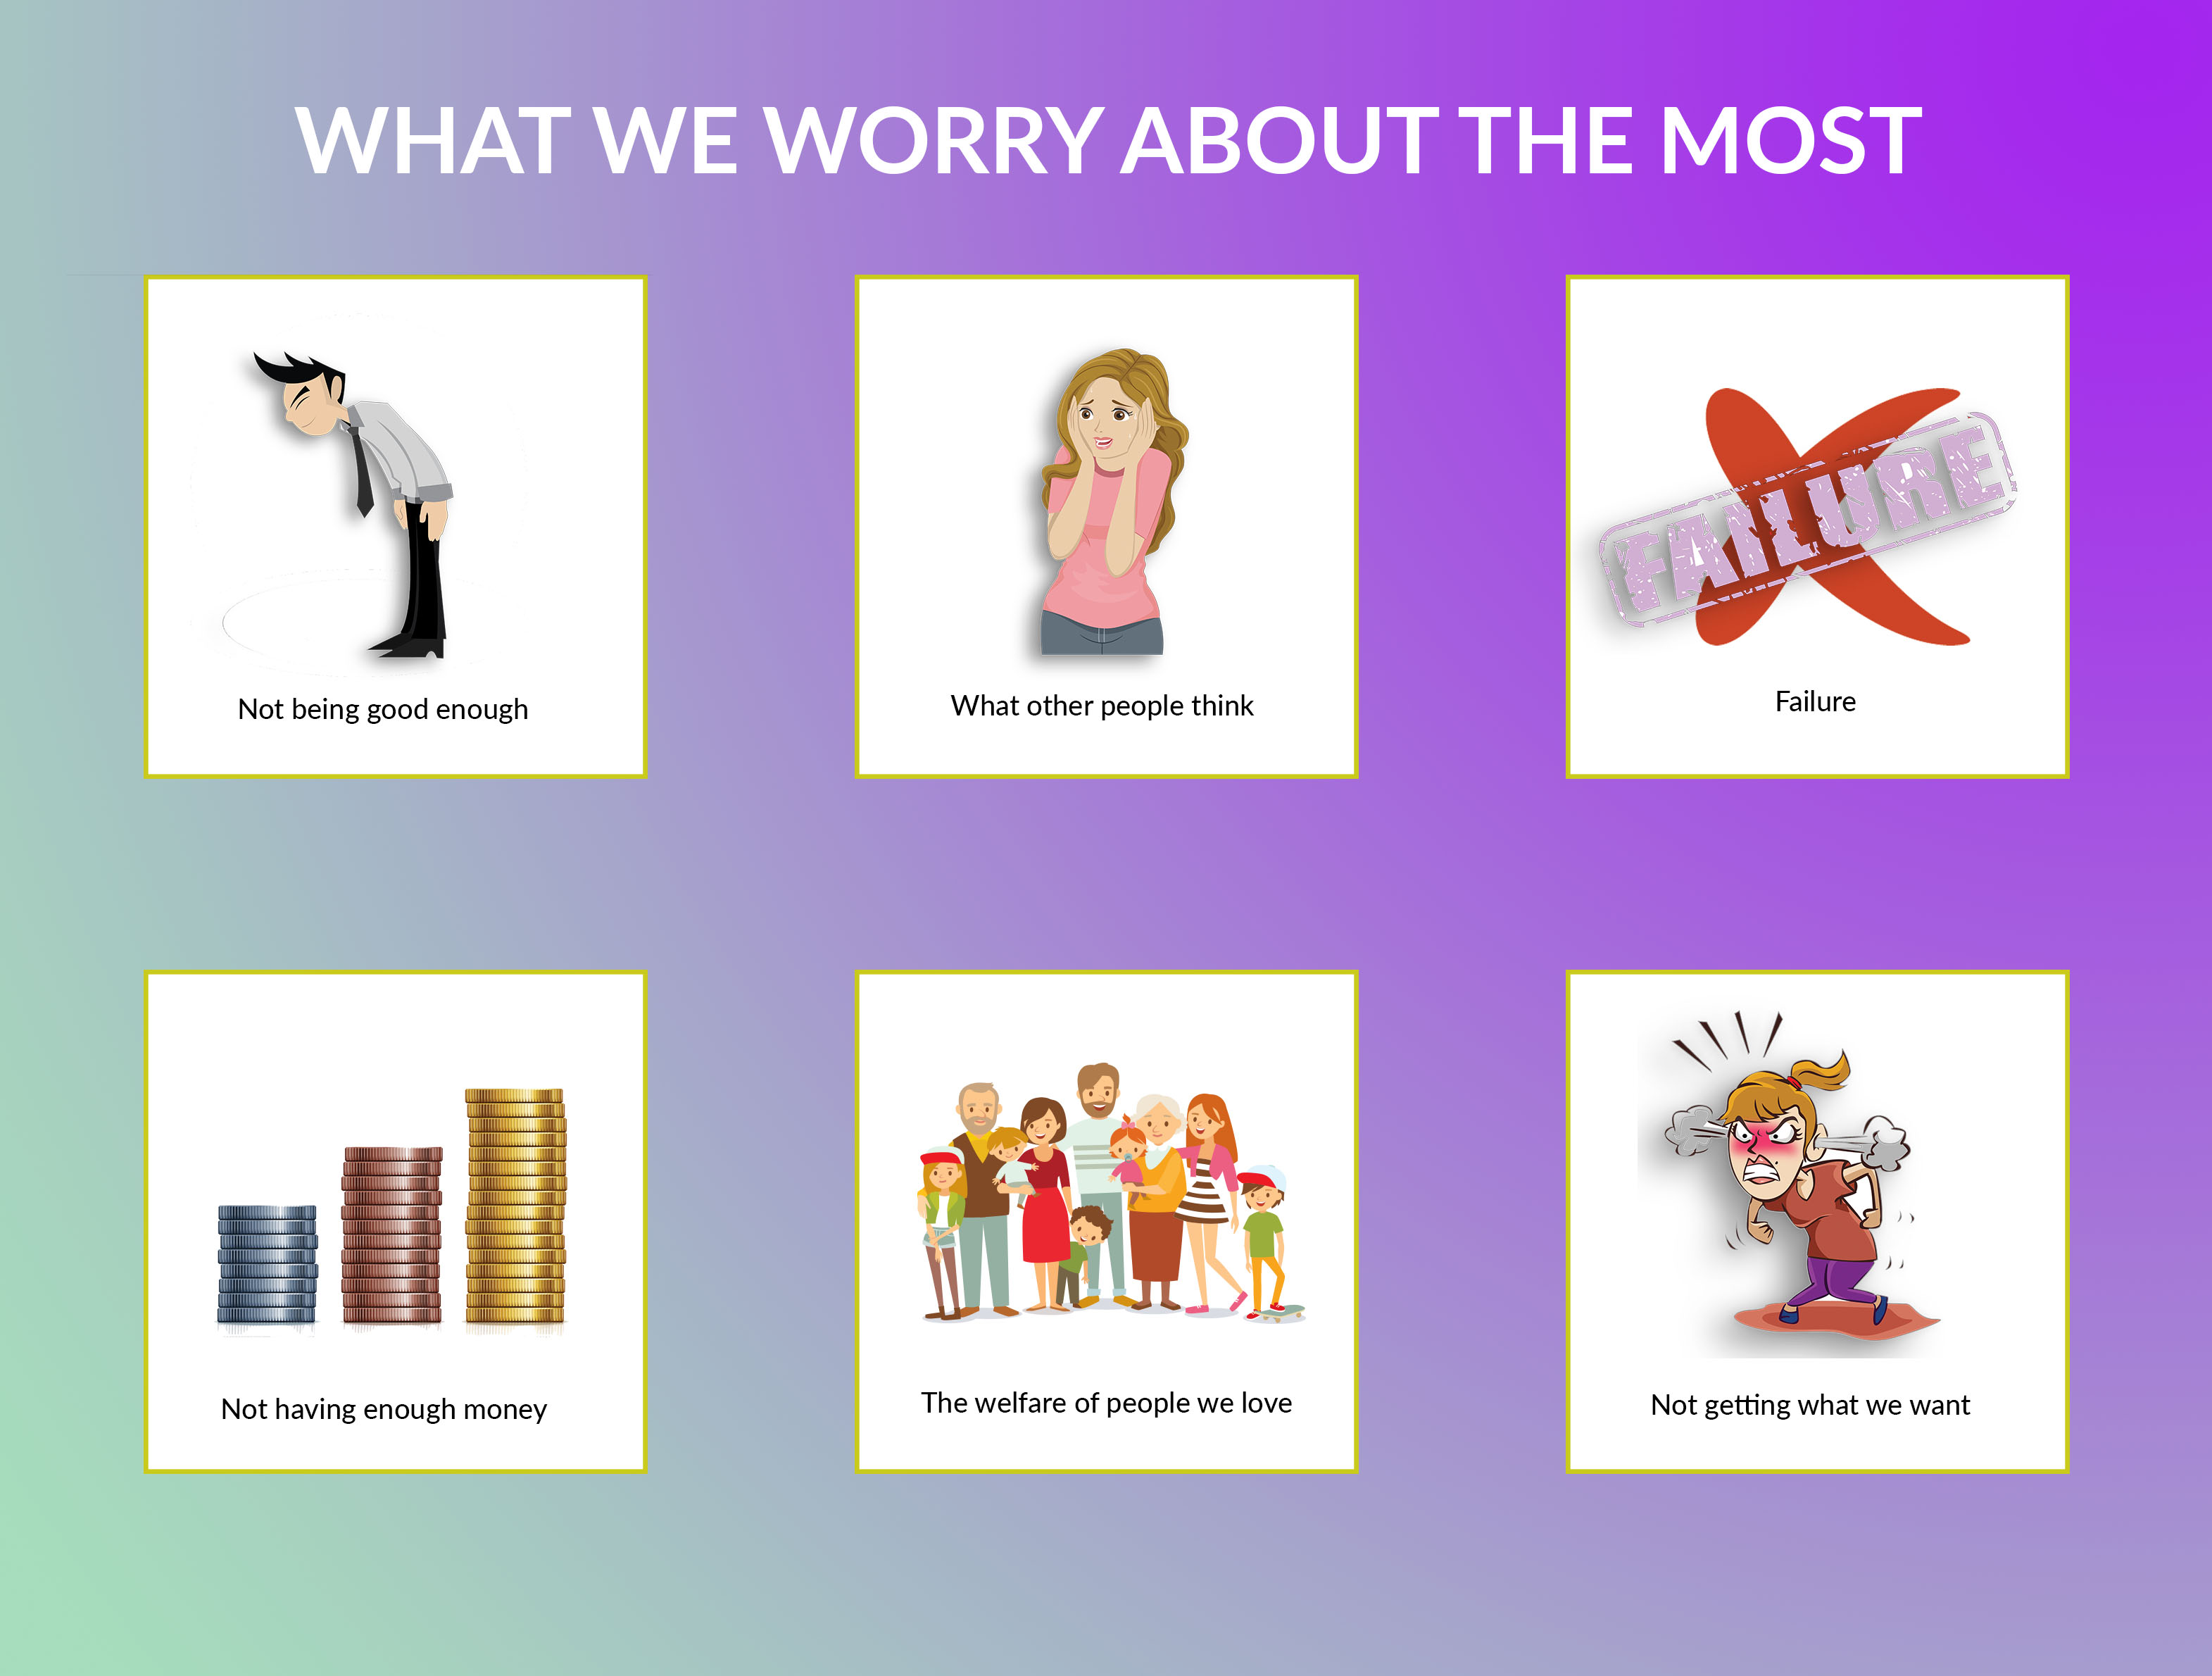 Things people worry about